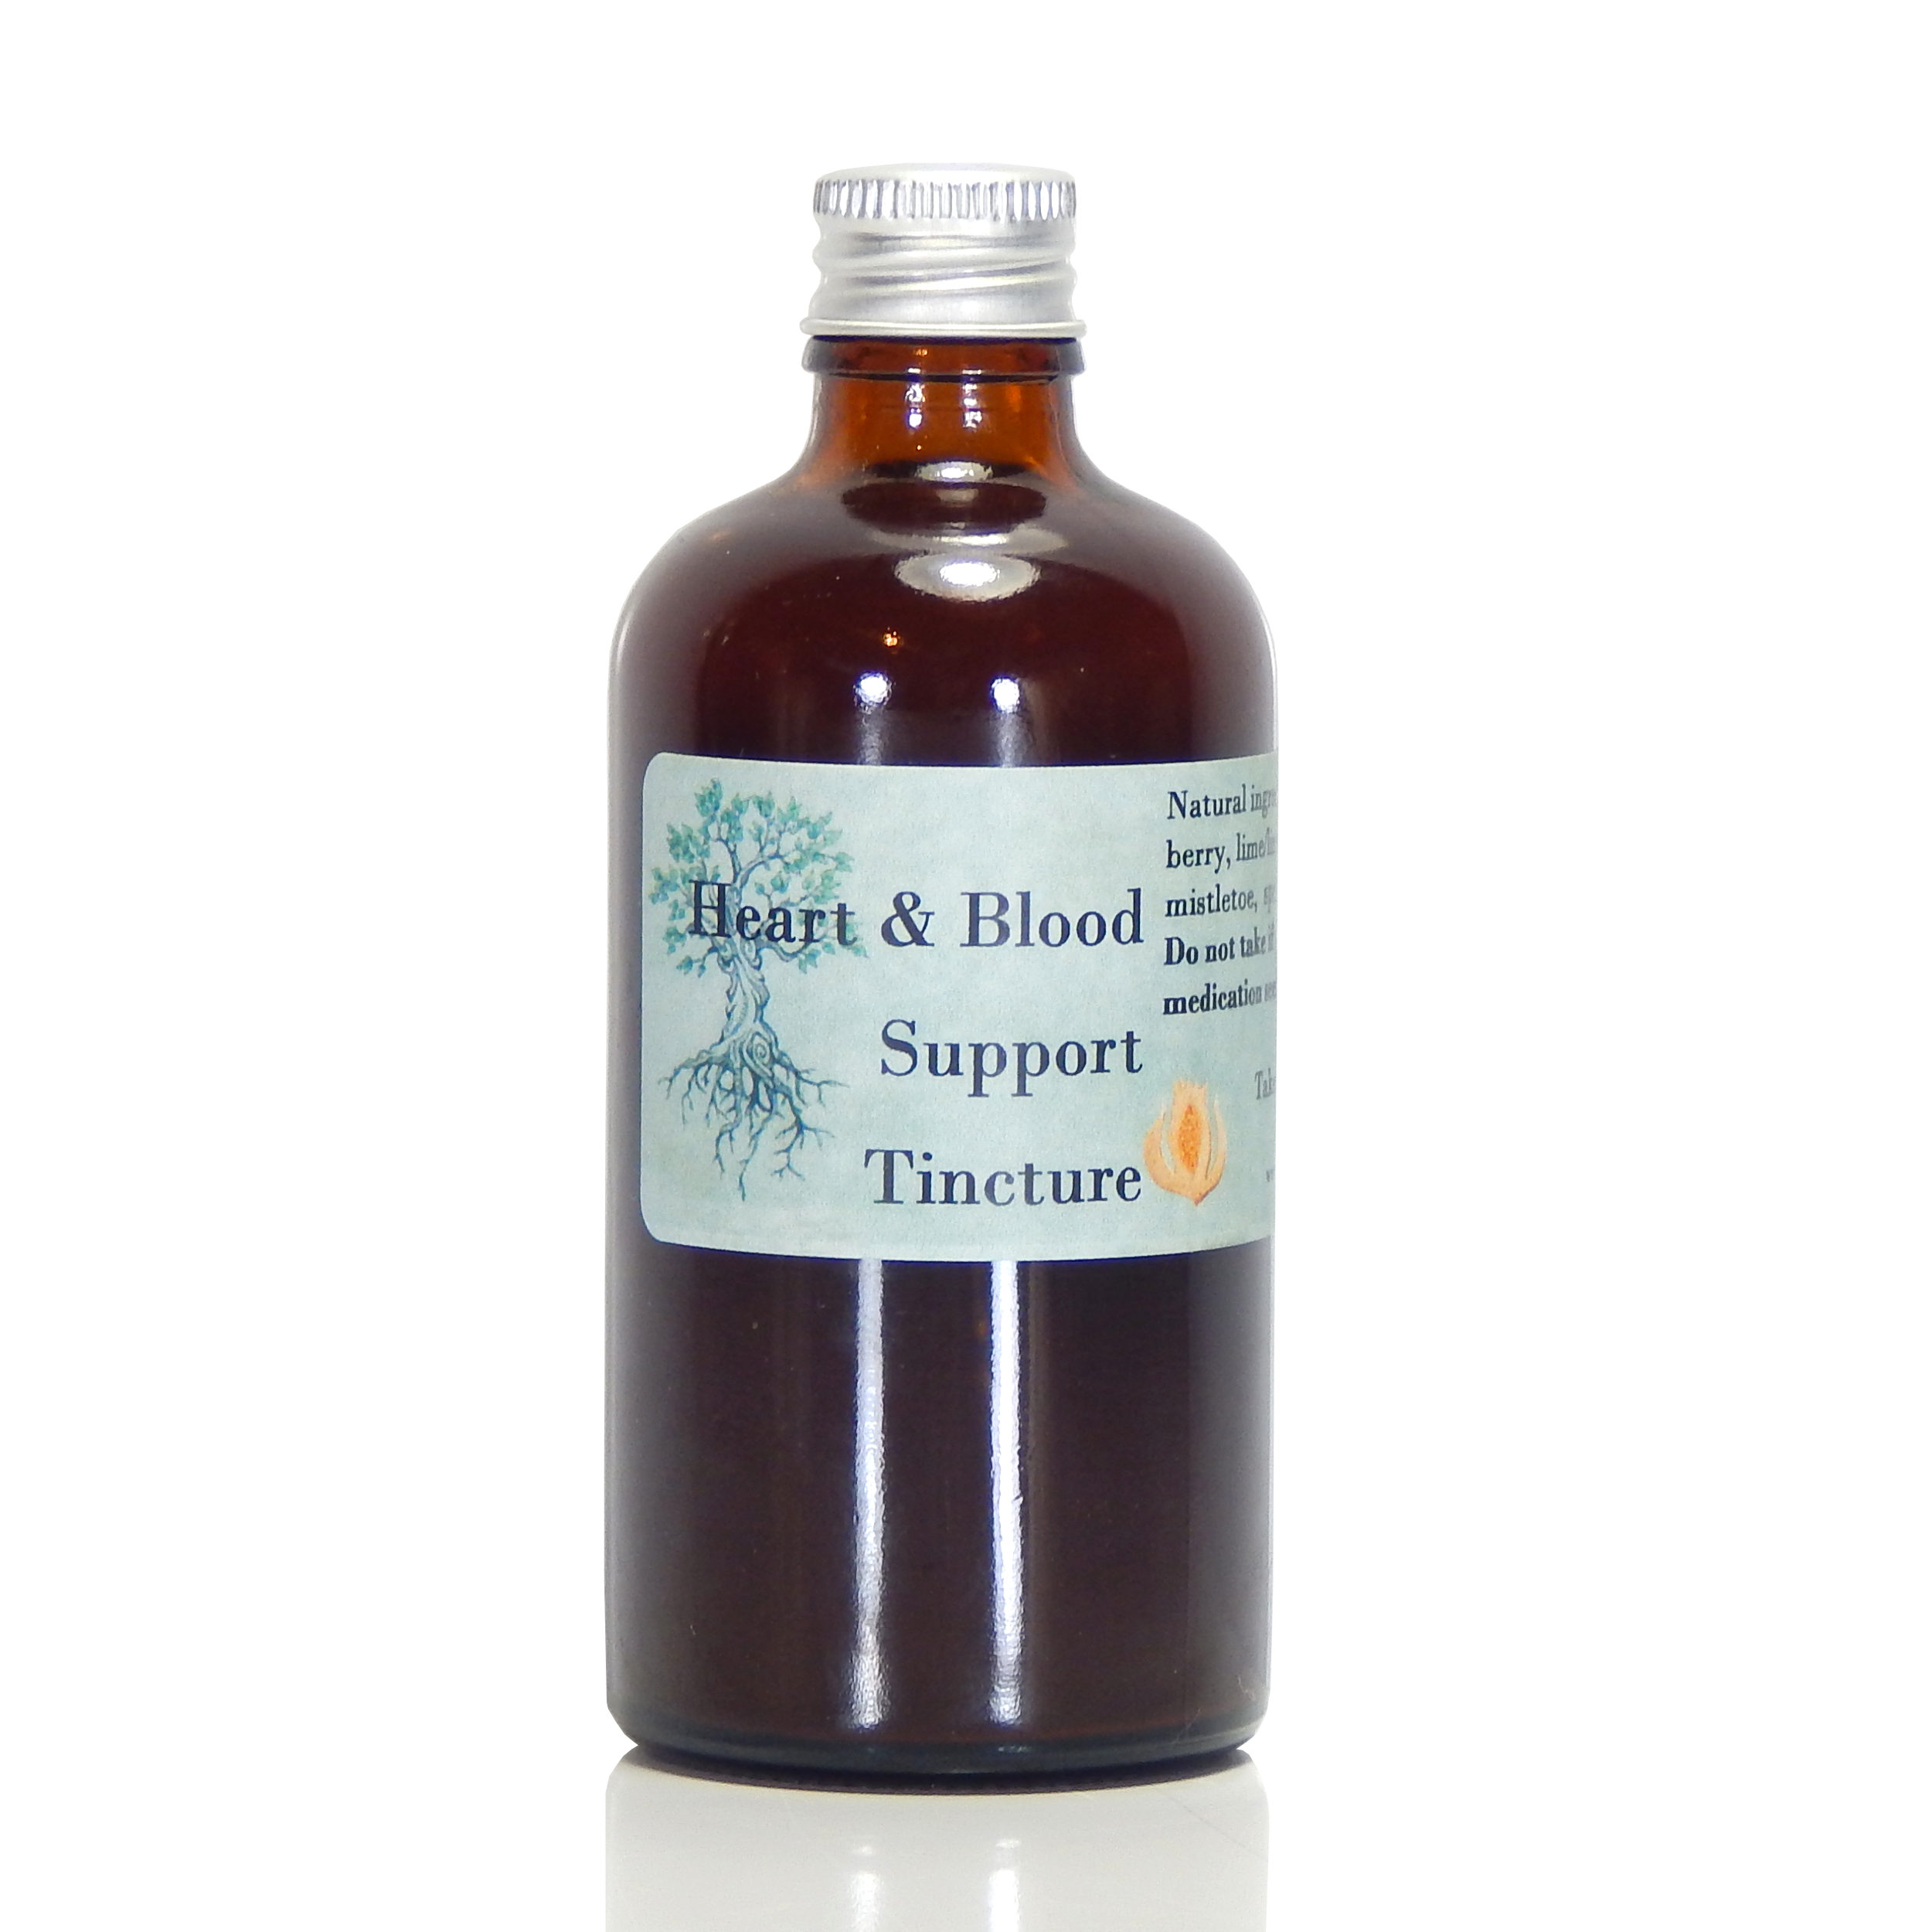 Heart & Blood Support Tincture